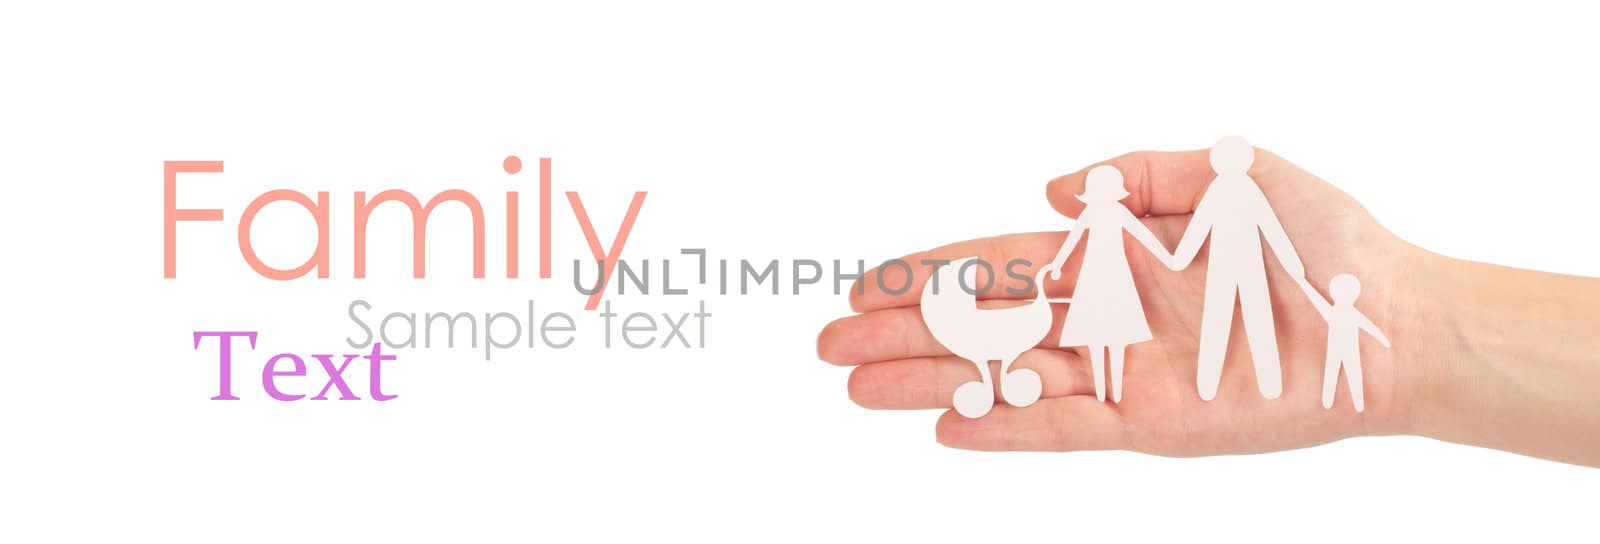 paper family in hands isolated on white